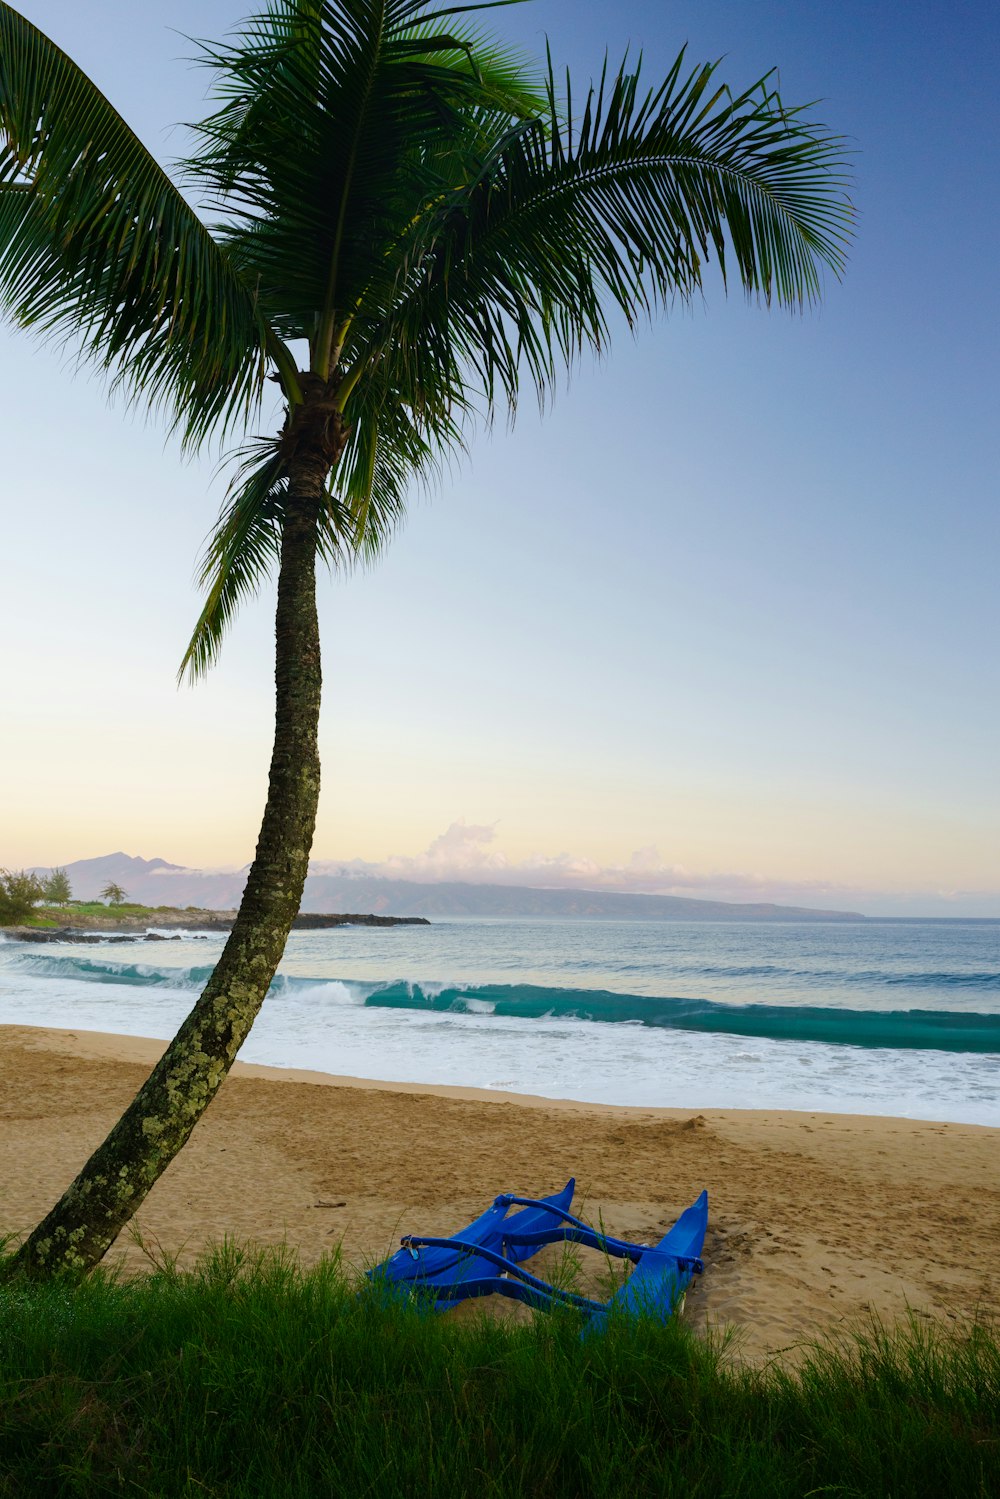 a palm tree on a beach with a blue chair under it